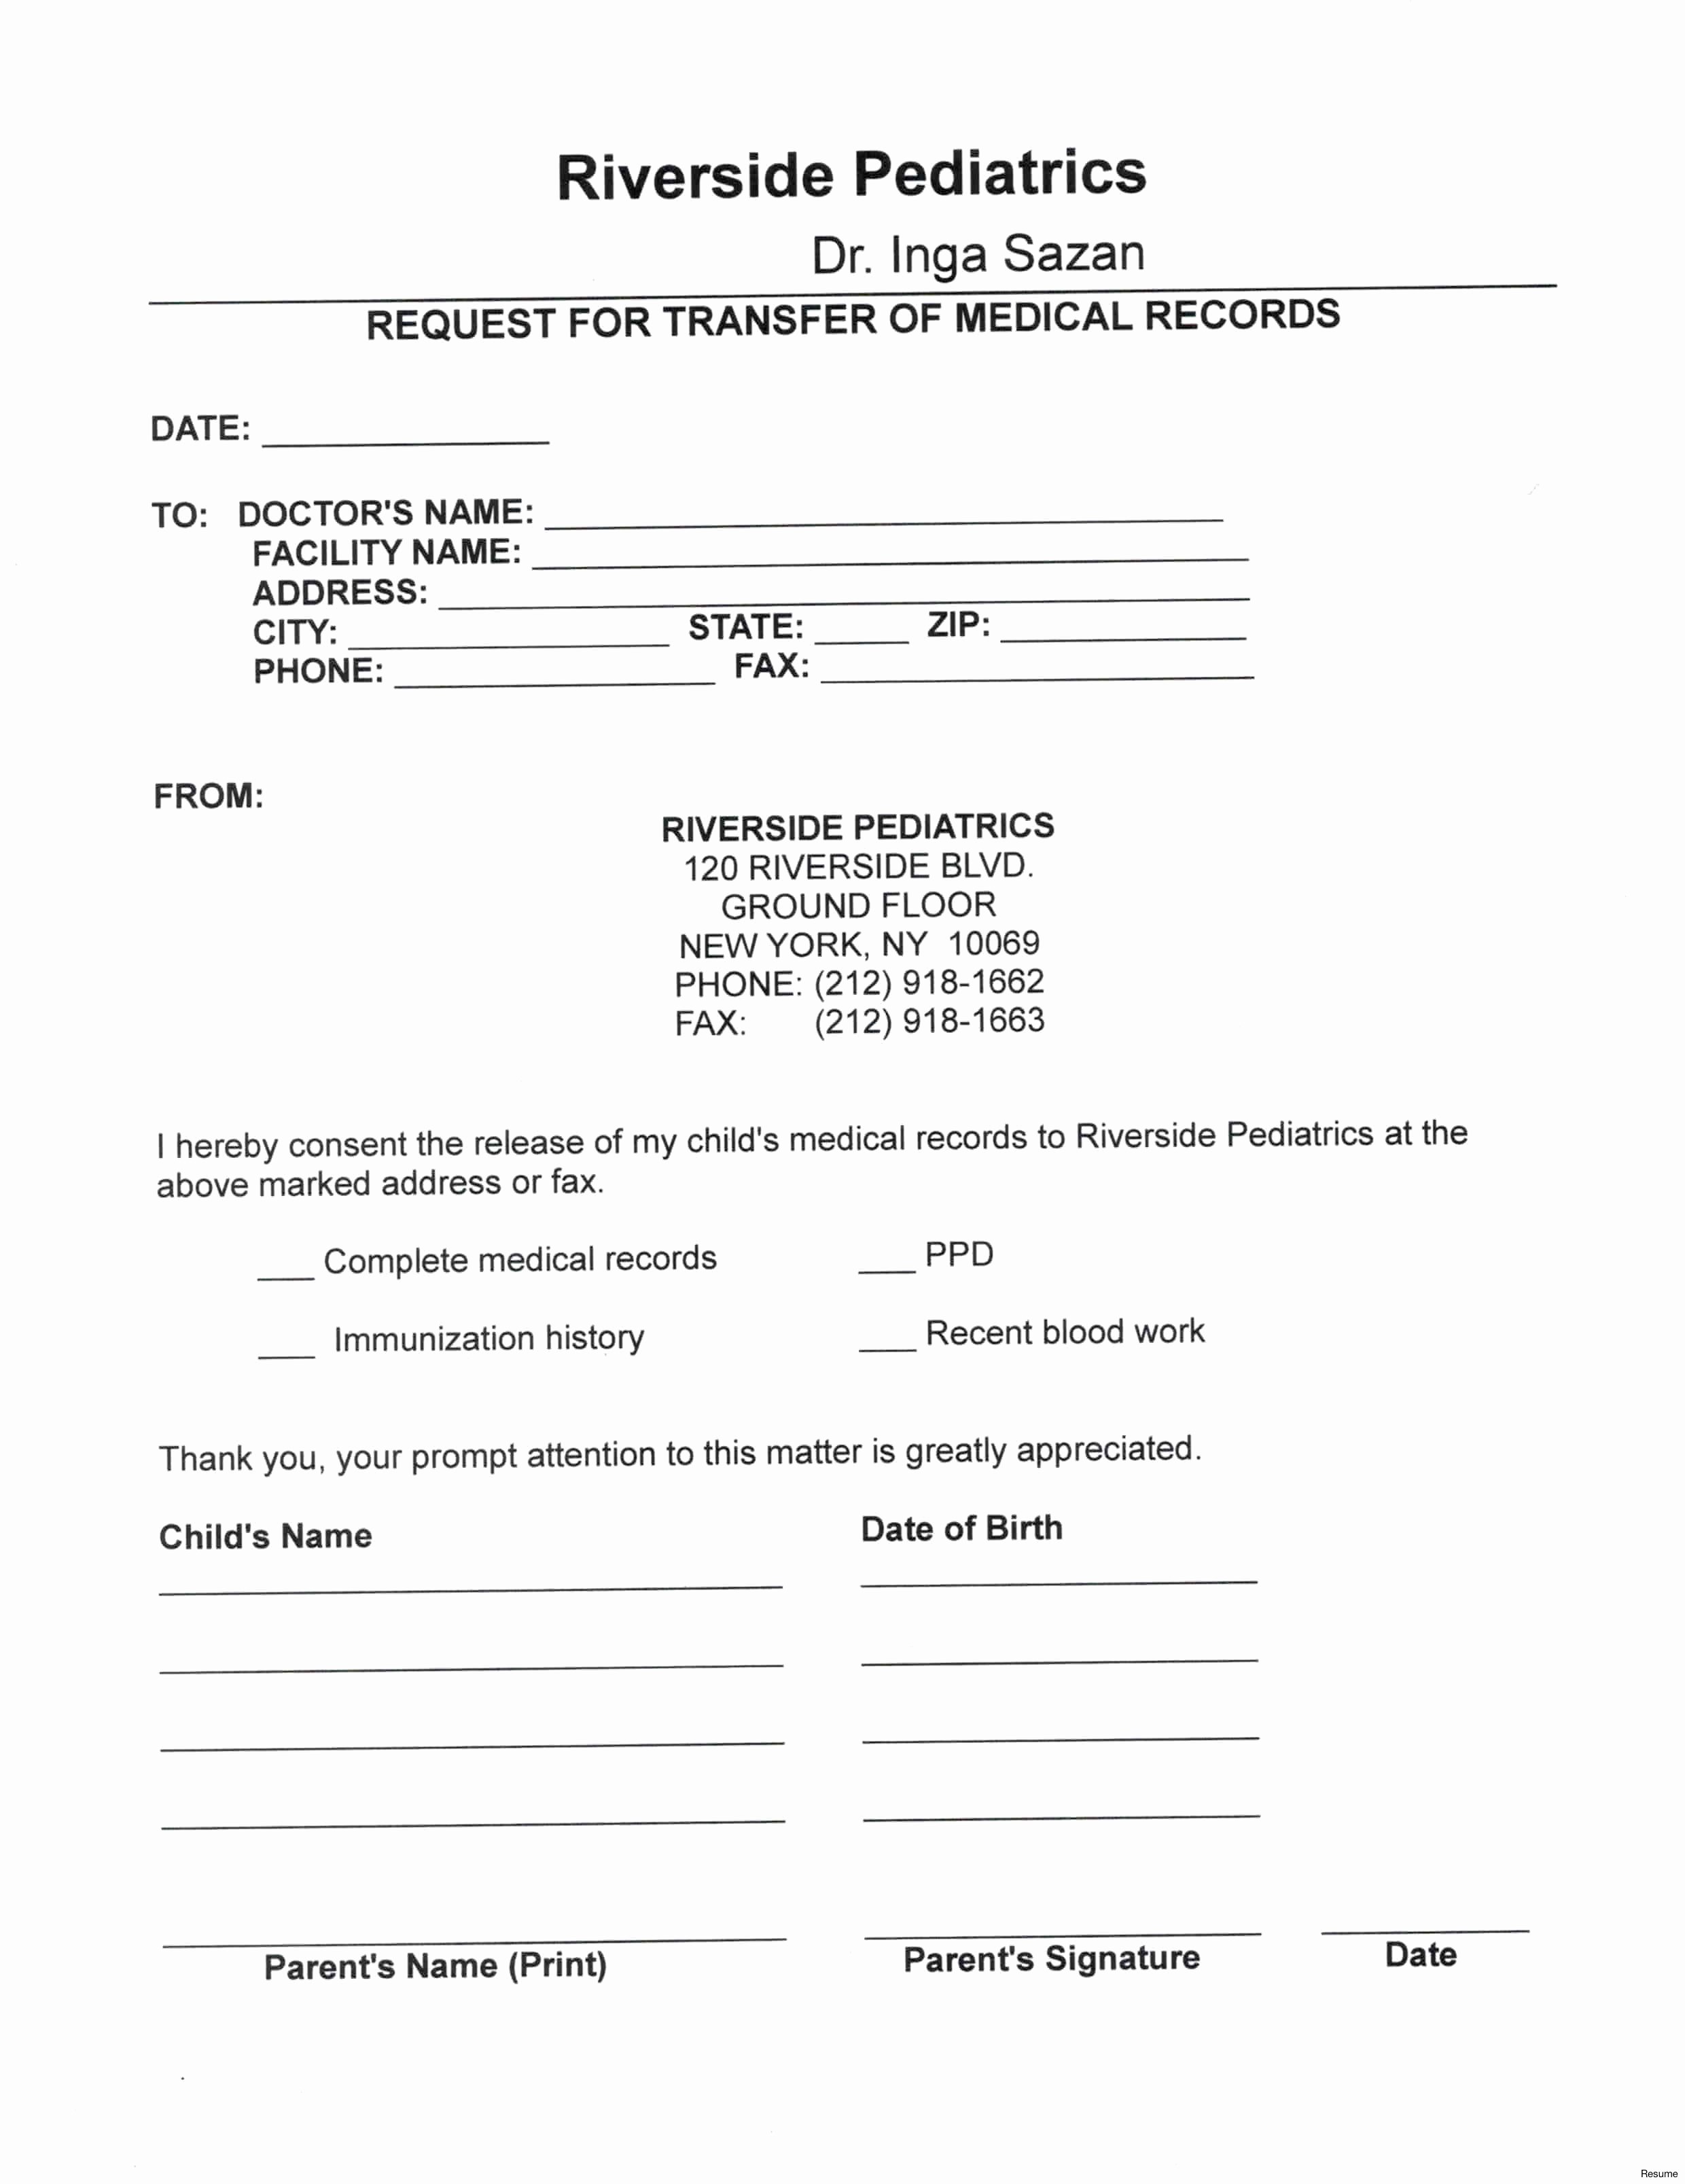 Medical Record form Template New Request for Medical Records Template Letter Samples